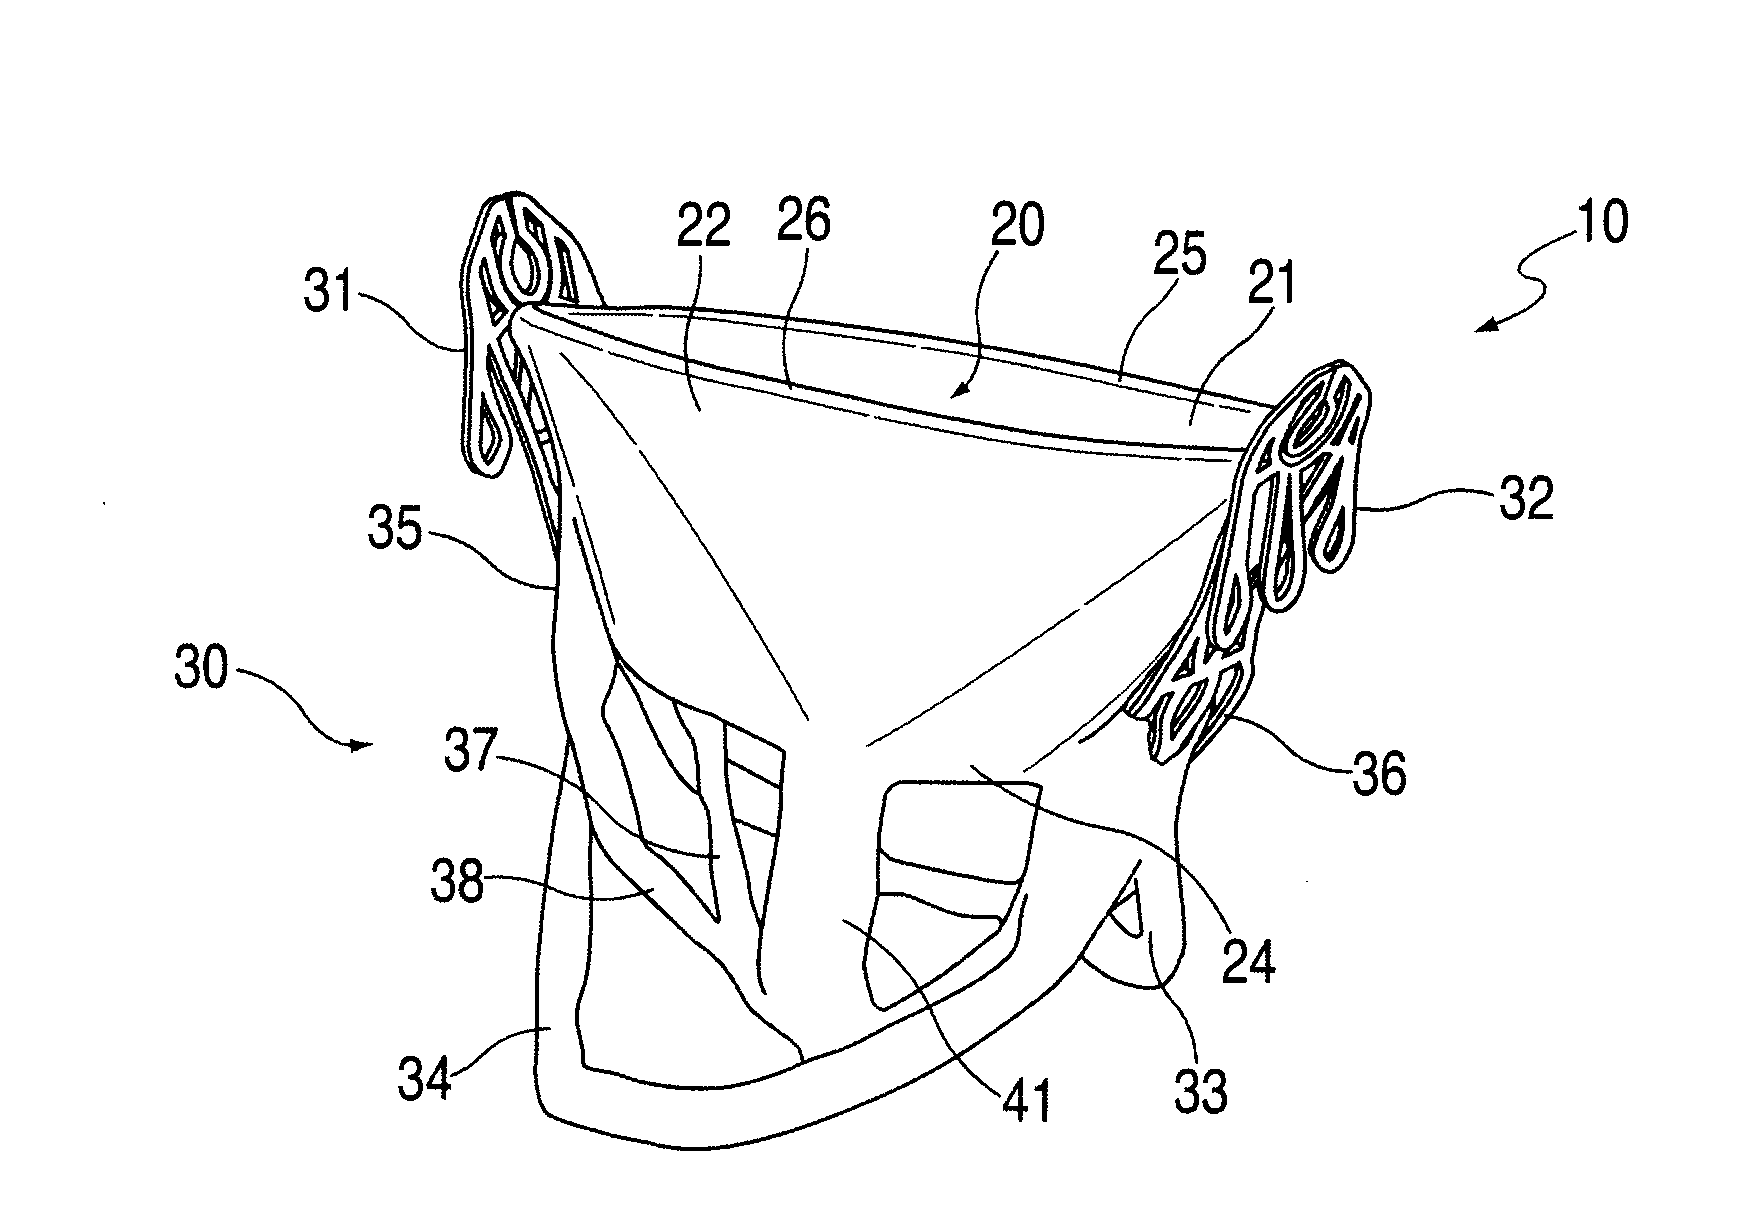 Prosthetic leaflet assembly for repairing a defective cardiac valve and methods of using the same